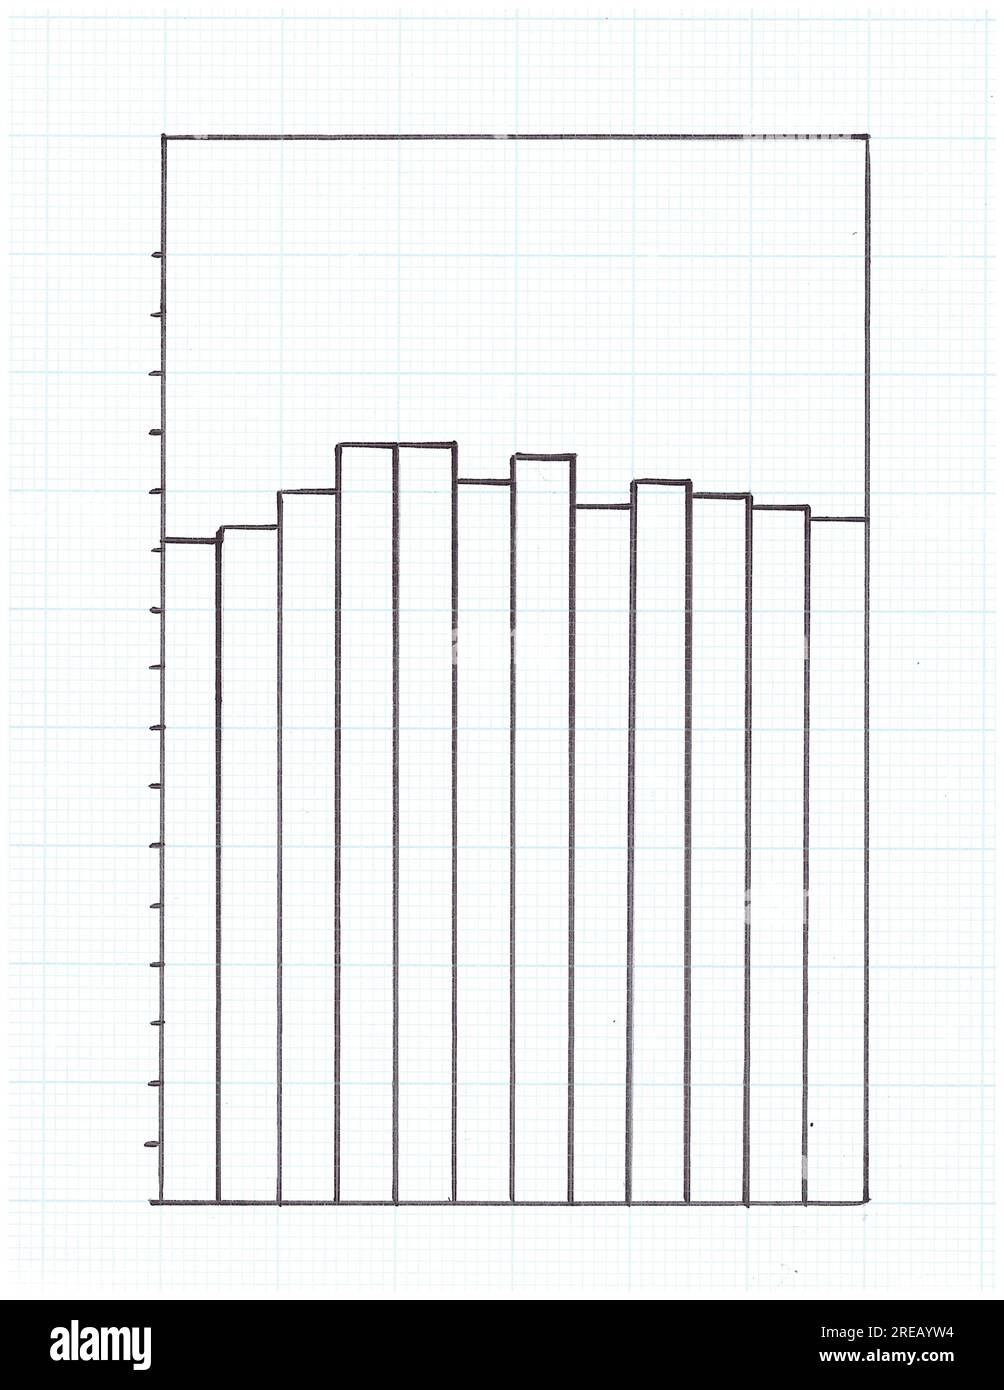 Bar Graph Outline Hand Drawn on Graph Paper Stock Photo